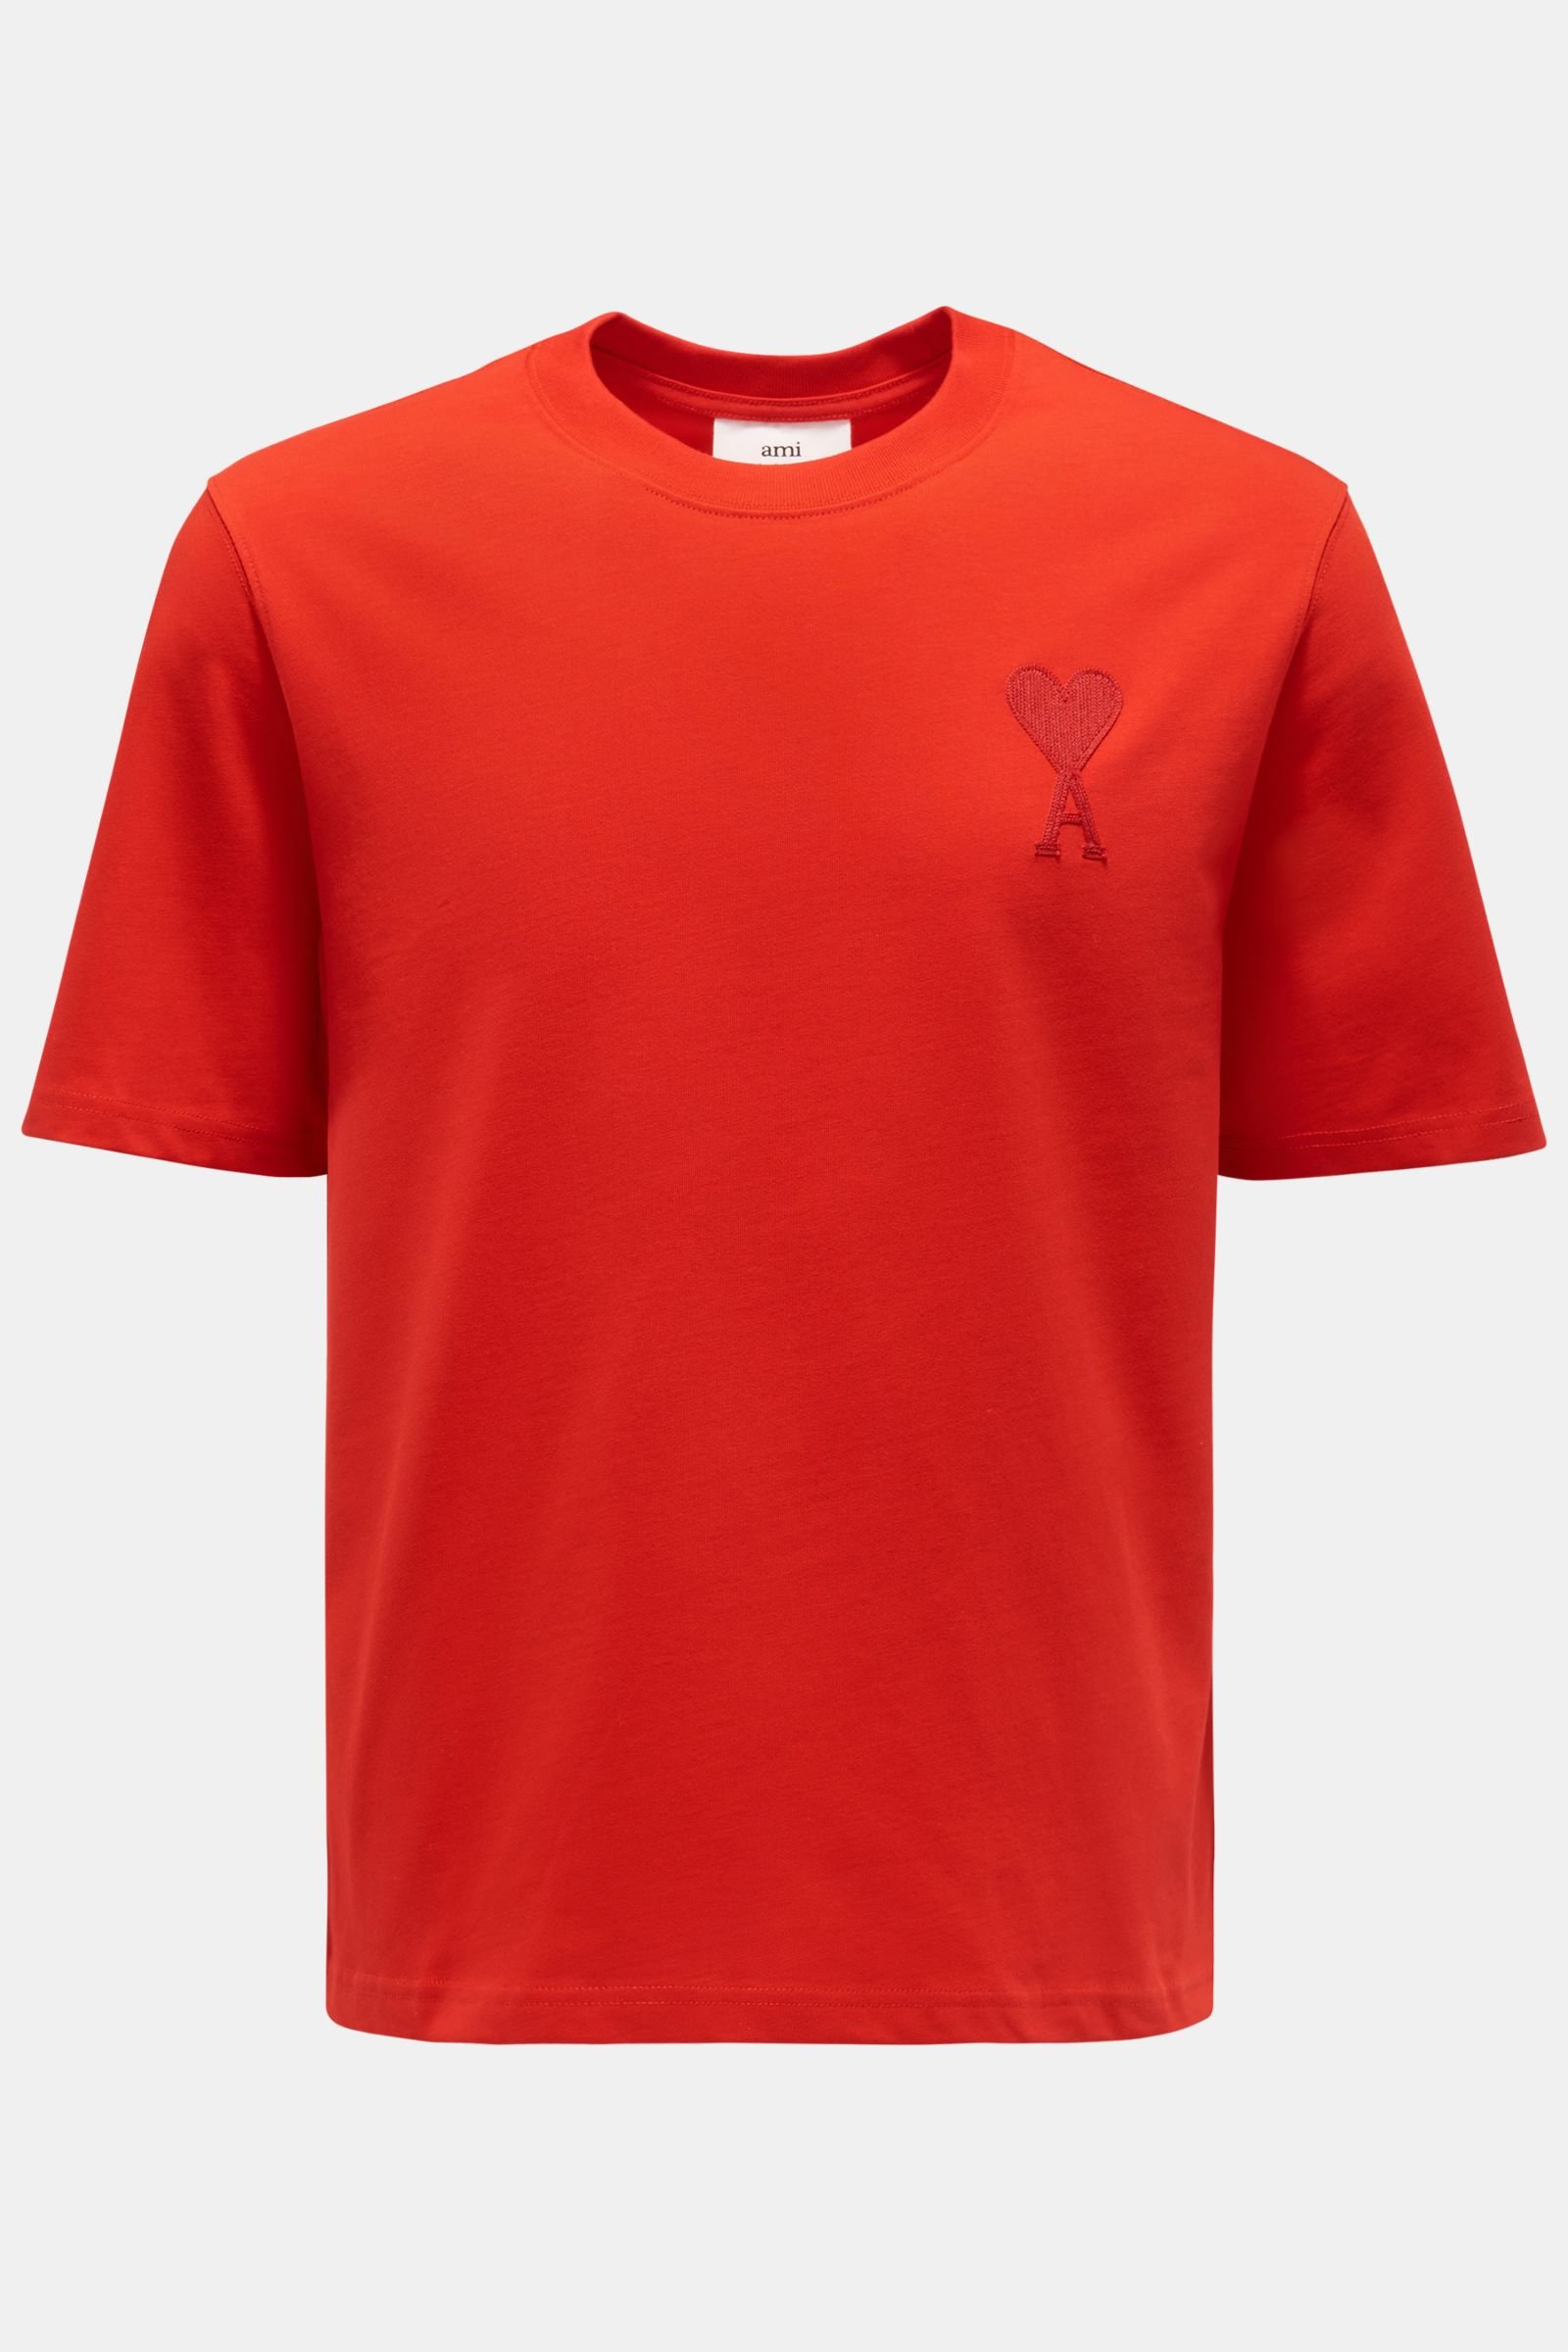 Crew neck T-shirt red 